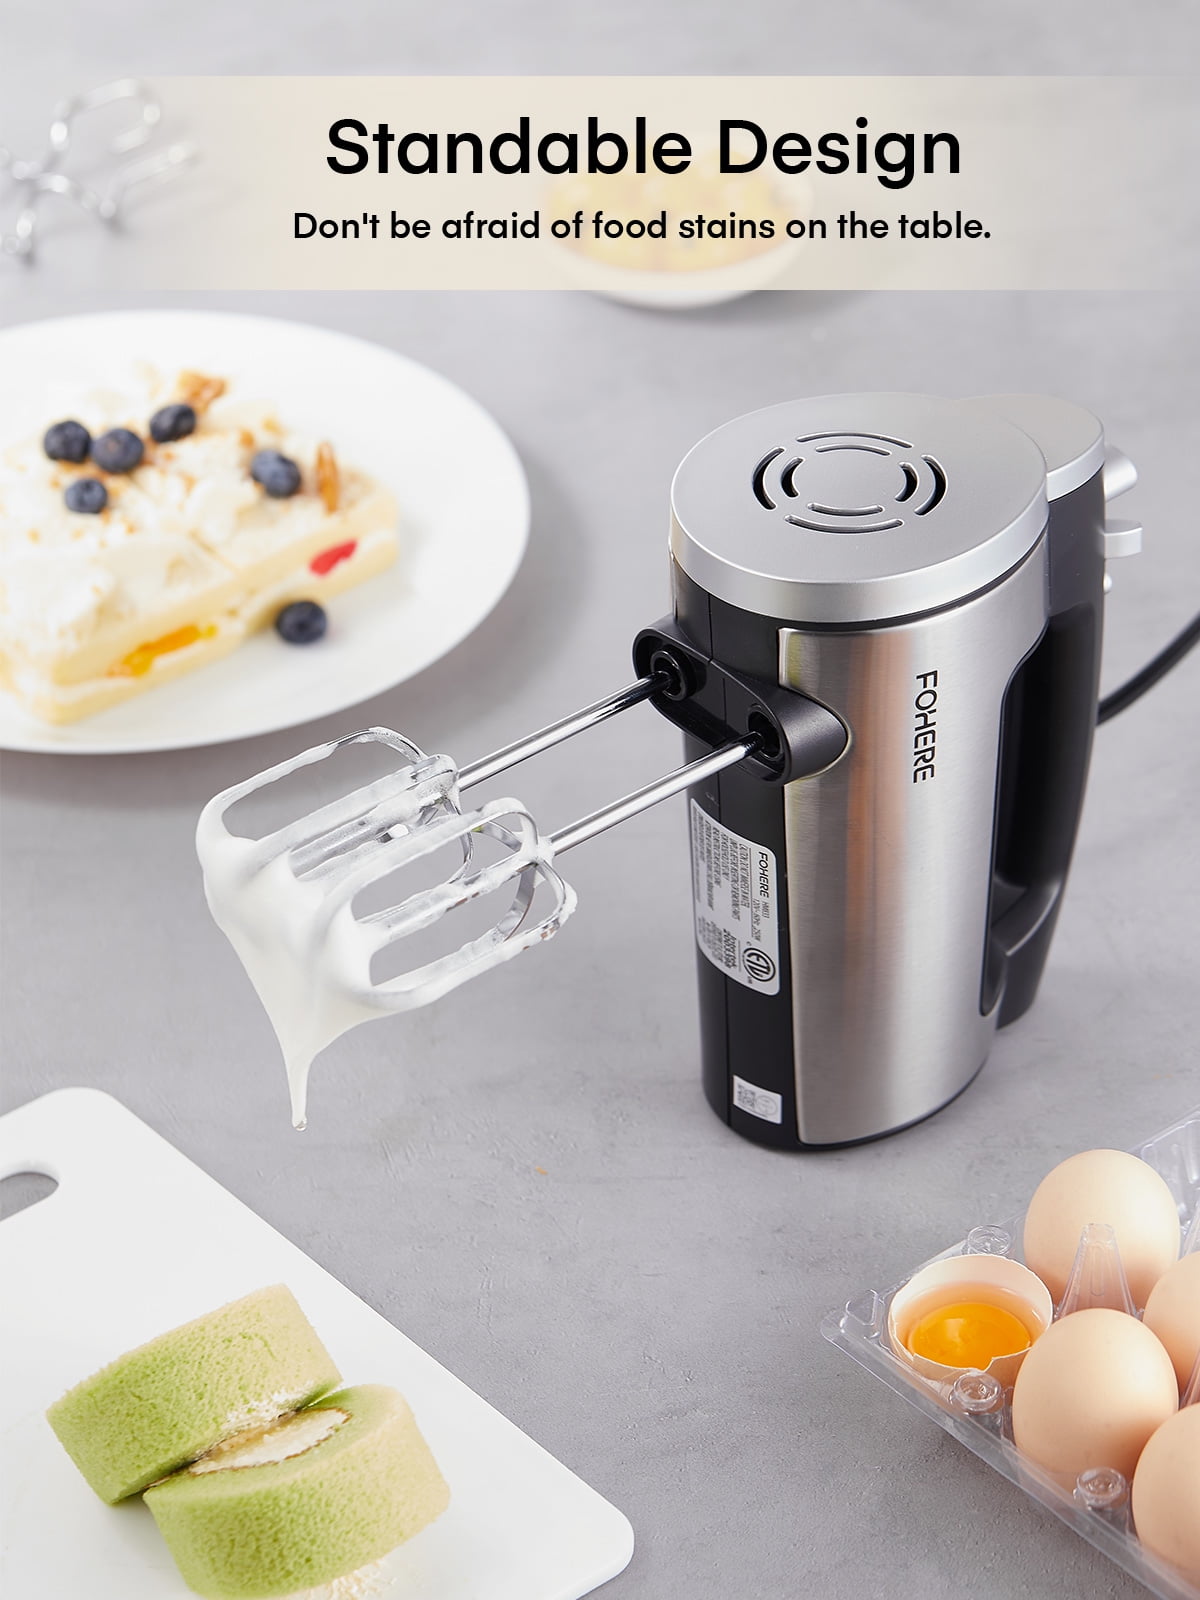 SHARDOR Hand Mixer Electric, 6 Speed & Turbo Handheld Mixer with 5  Stainless Steel Accessories, Electic Mixer for Whipping, Mixing Cookies,  Brownie